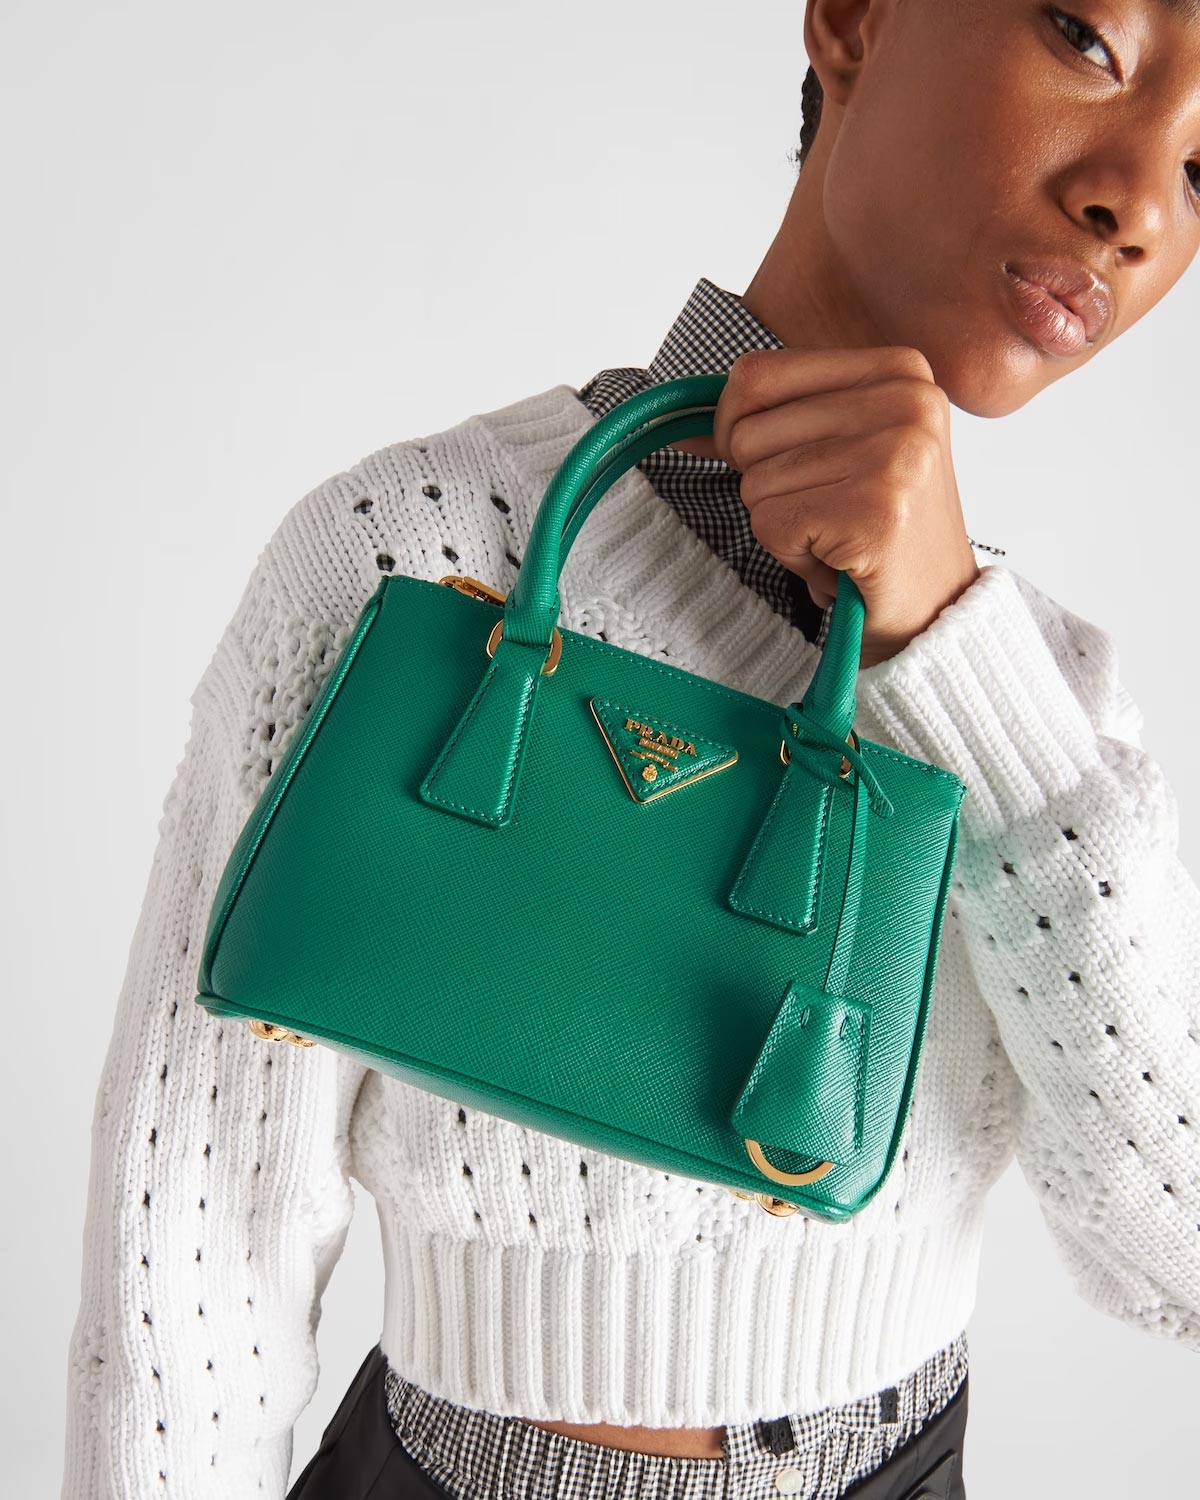 Download Exploring the Timeless Sophistication of Louis Vuitton